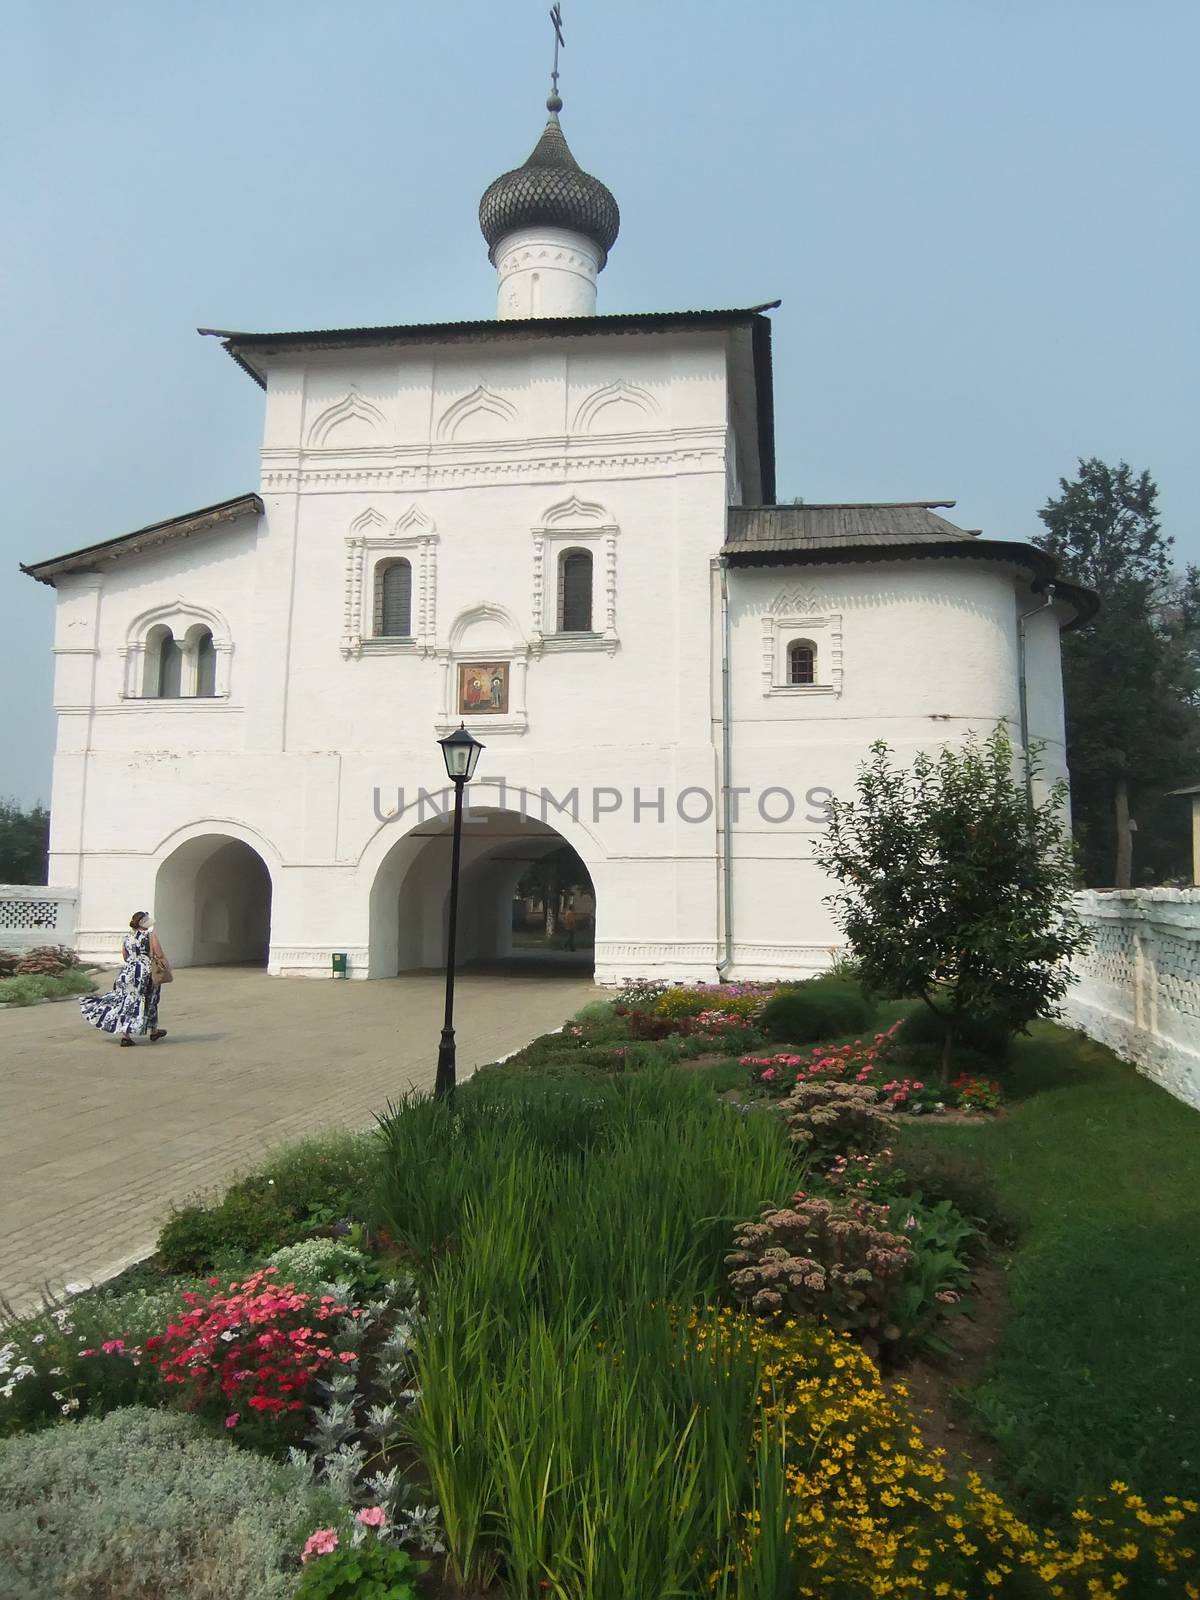 Annunciation Gate Church in Monastery of Saint Euthymius in Suzd by donya_nedomam